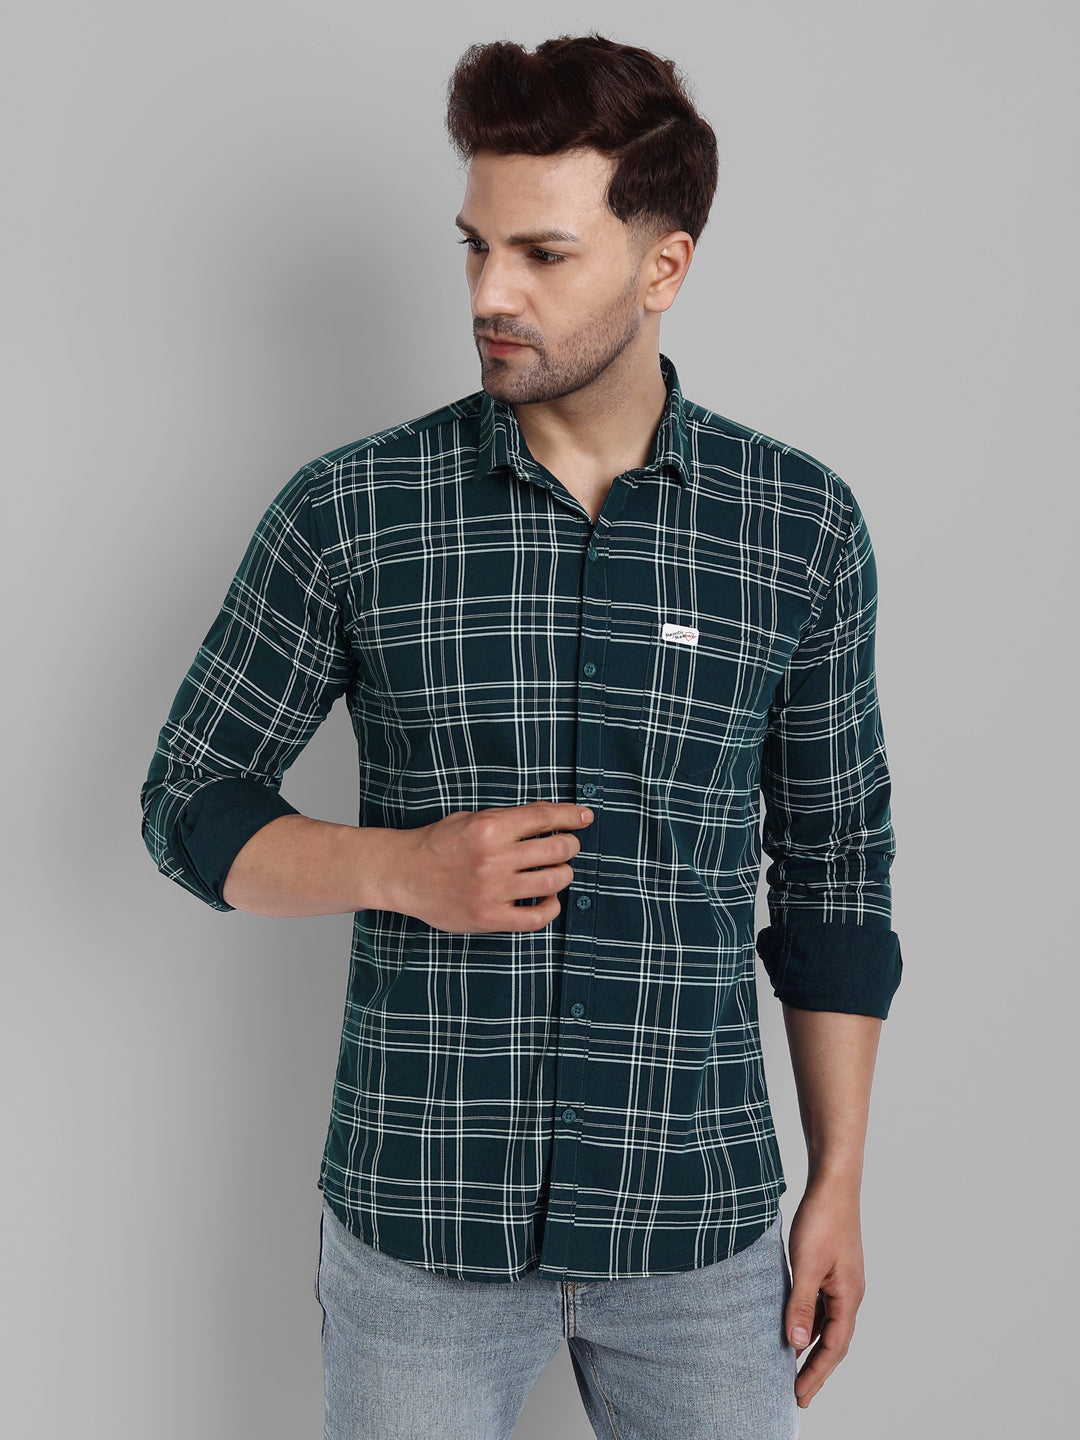 Classic Checkmate Pure Cotton Checkered Shirt - Teal Blue